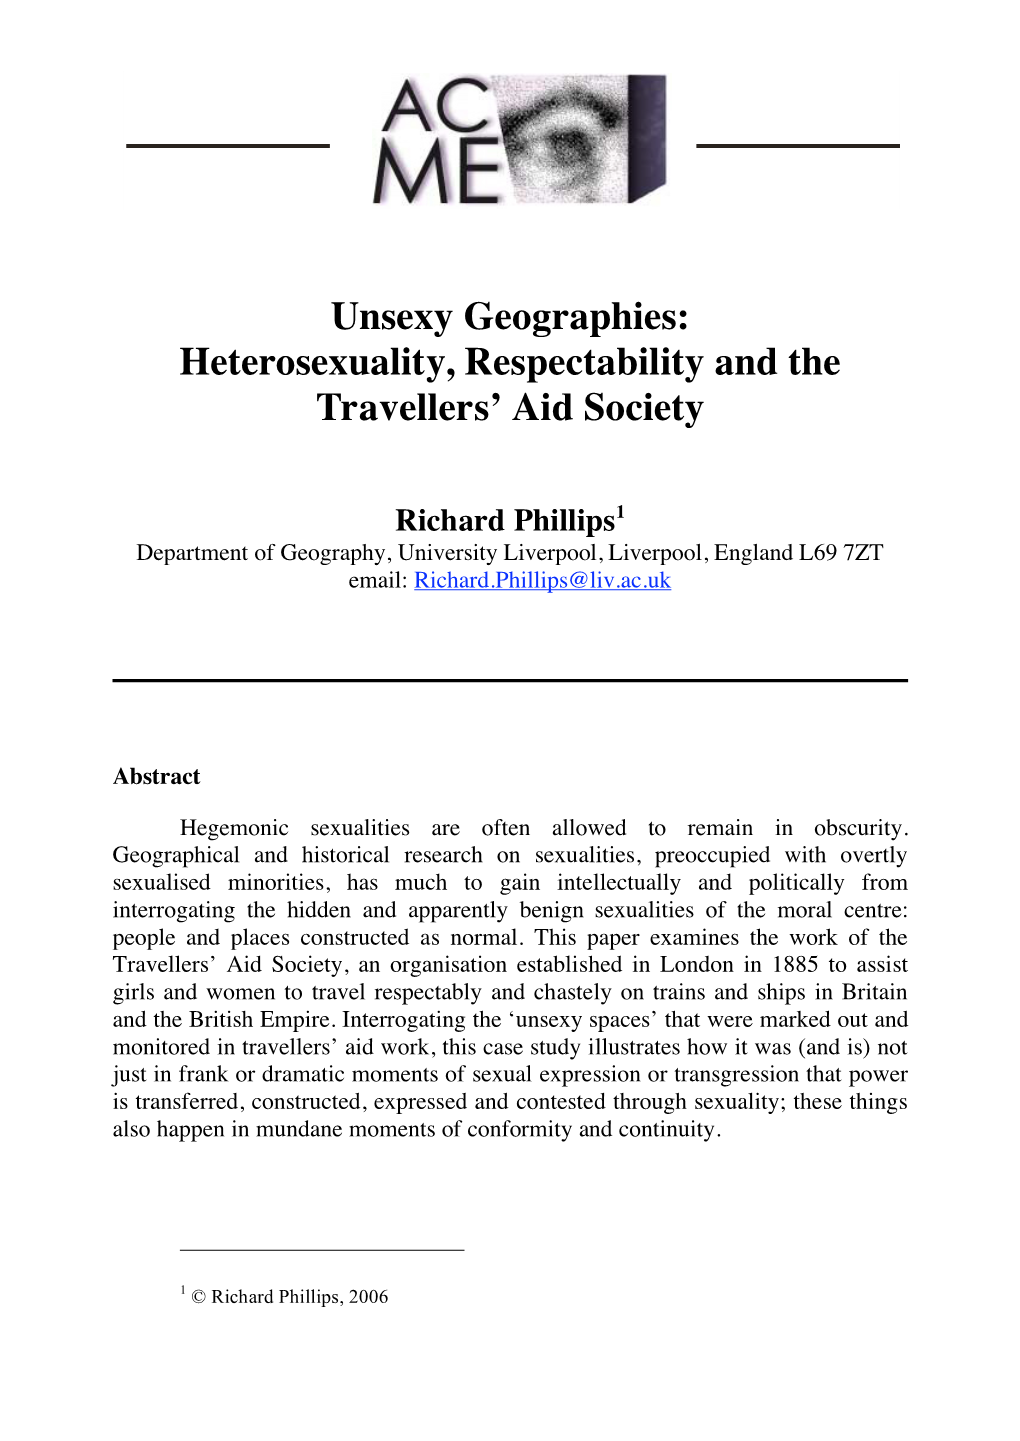 Unsexy Geographies: Heterosexuality, Respectability and the Travellers’ Aid Society